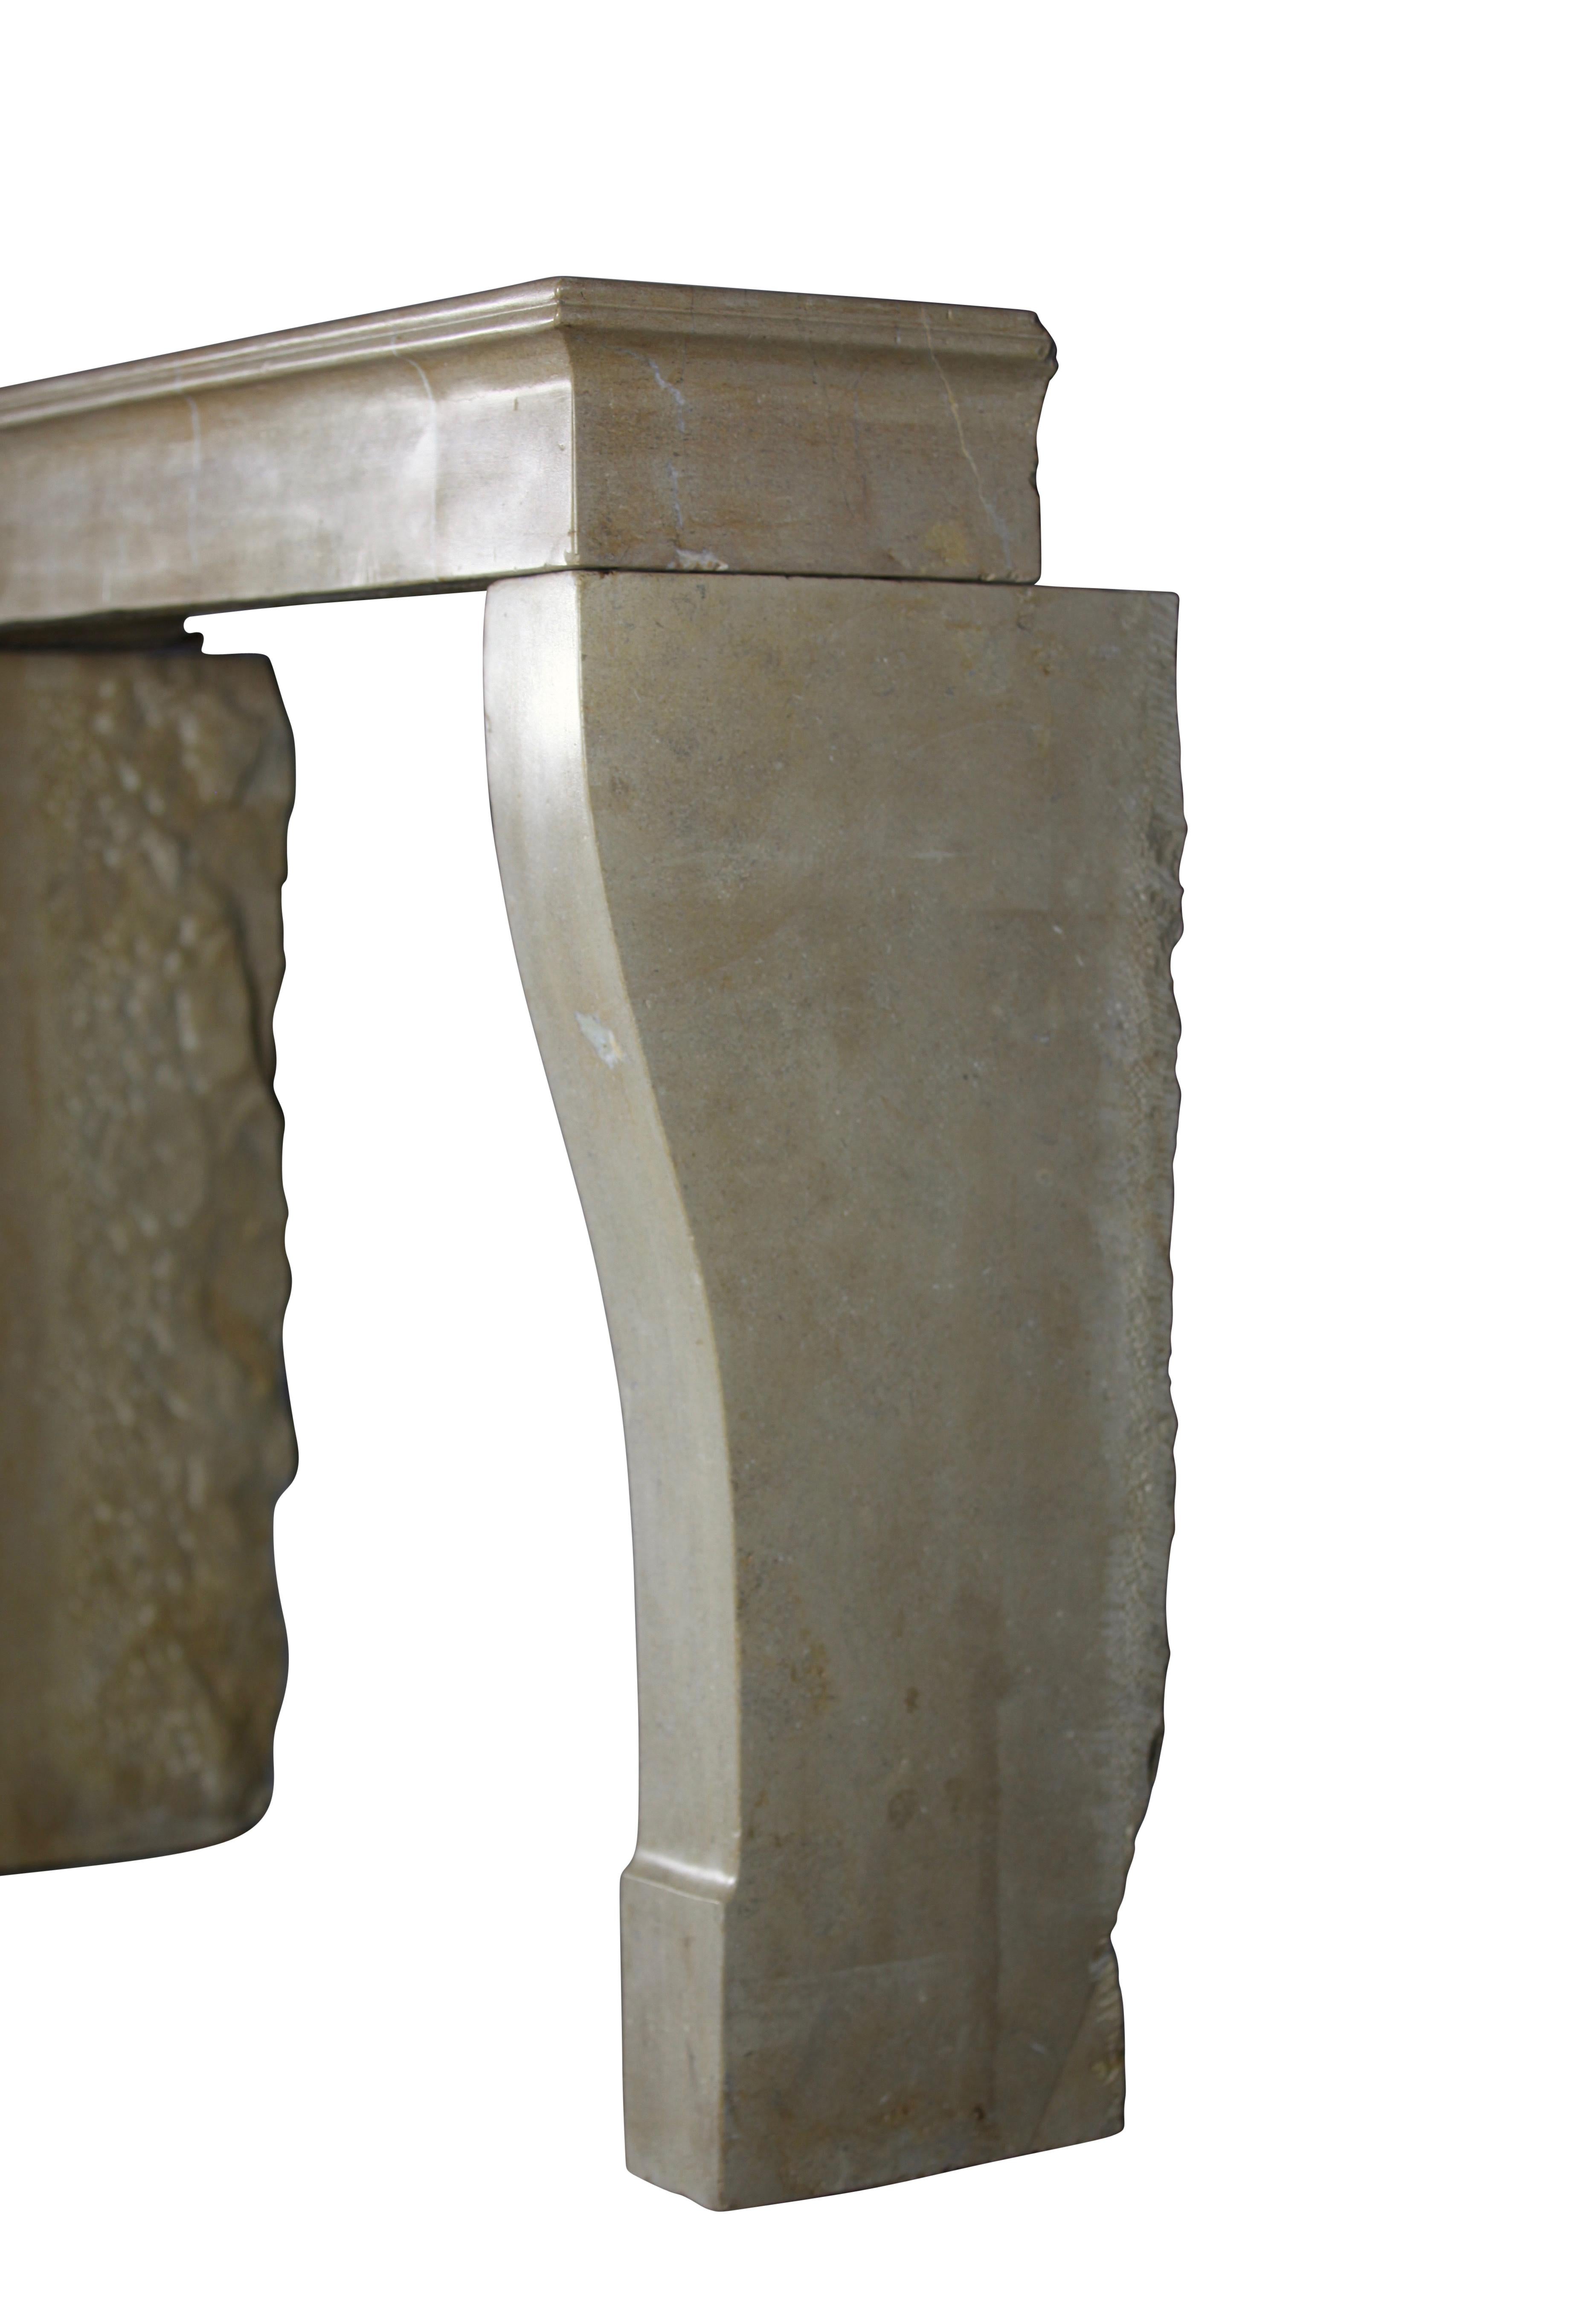 Light Reflecting French Style Antique Fireplace Surround in Limestone For Sale 1